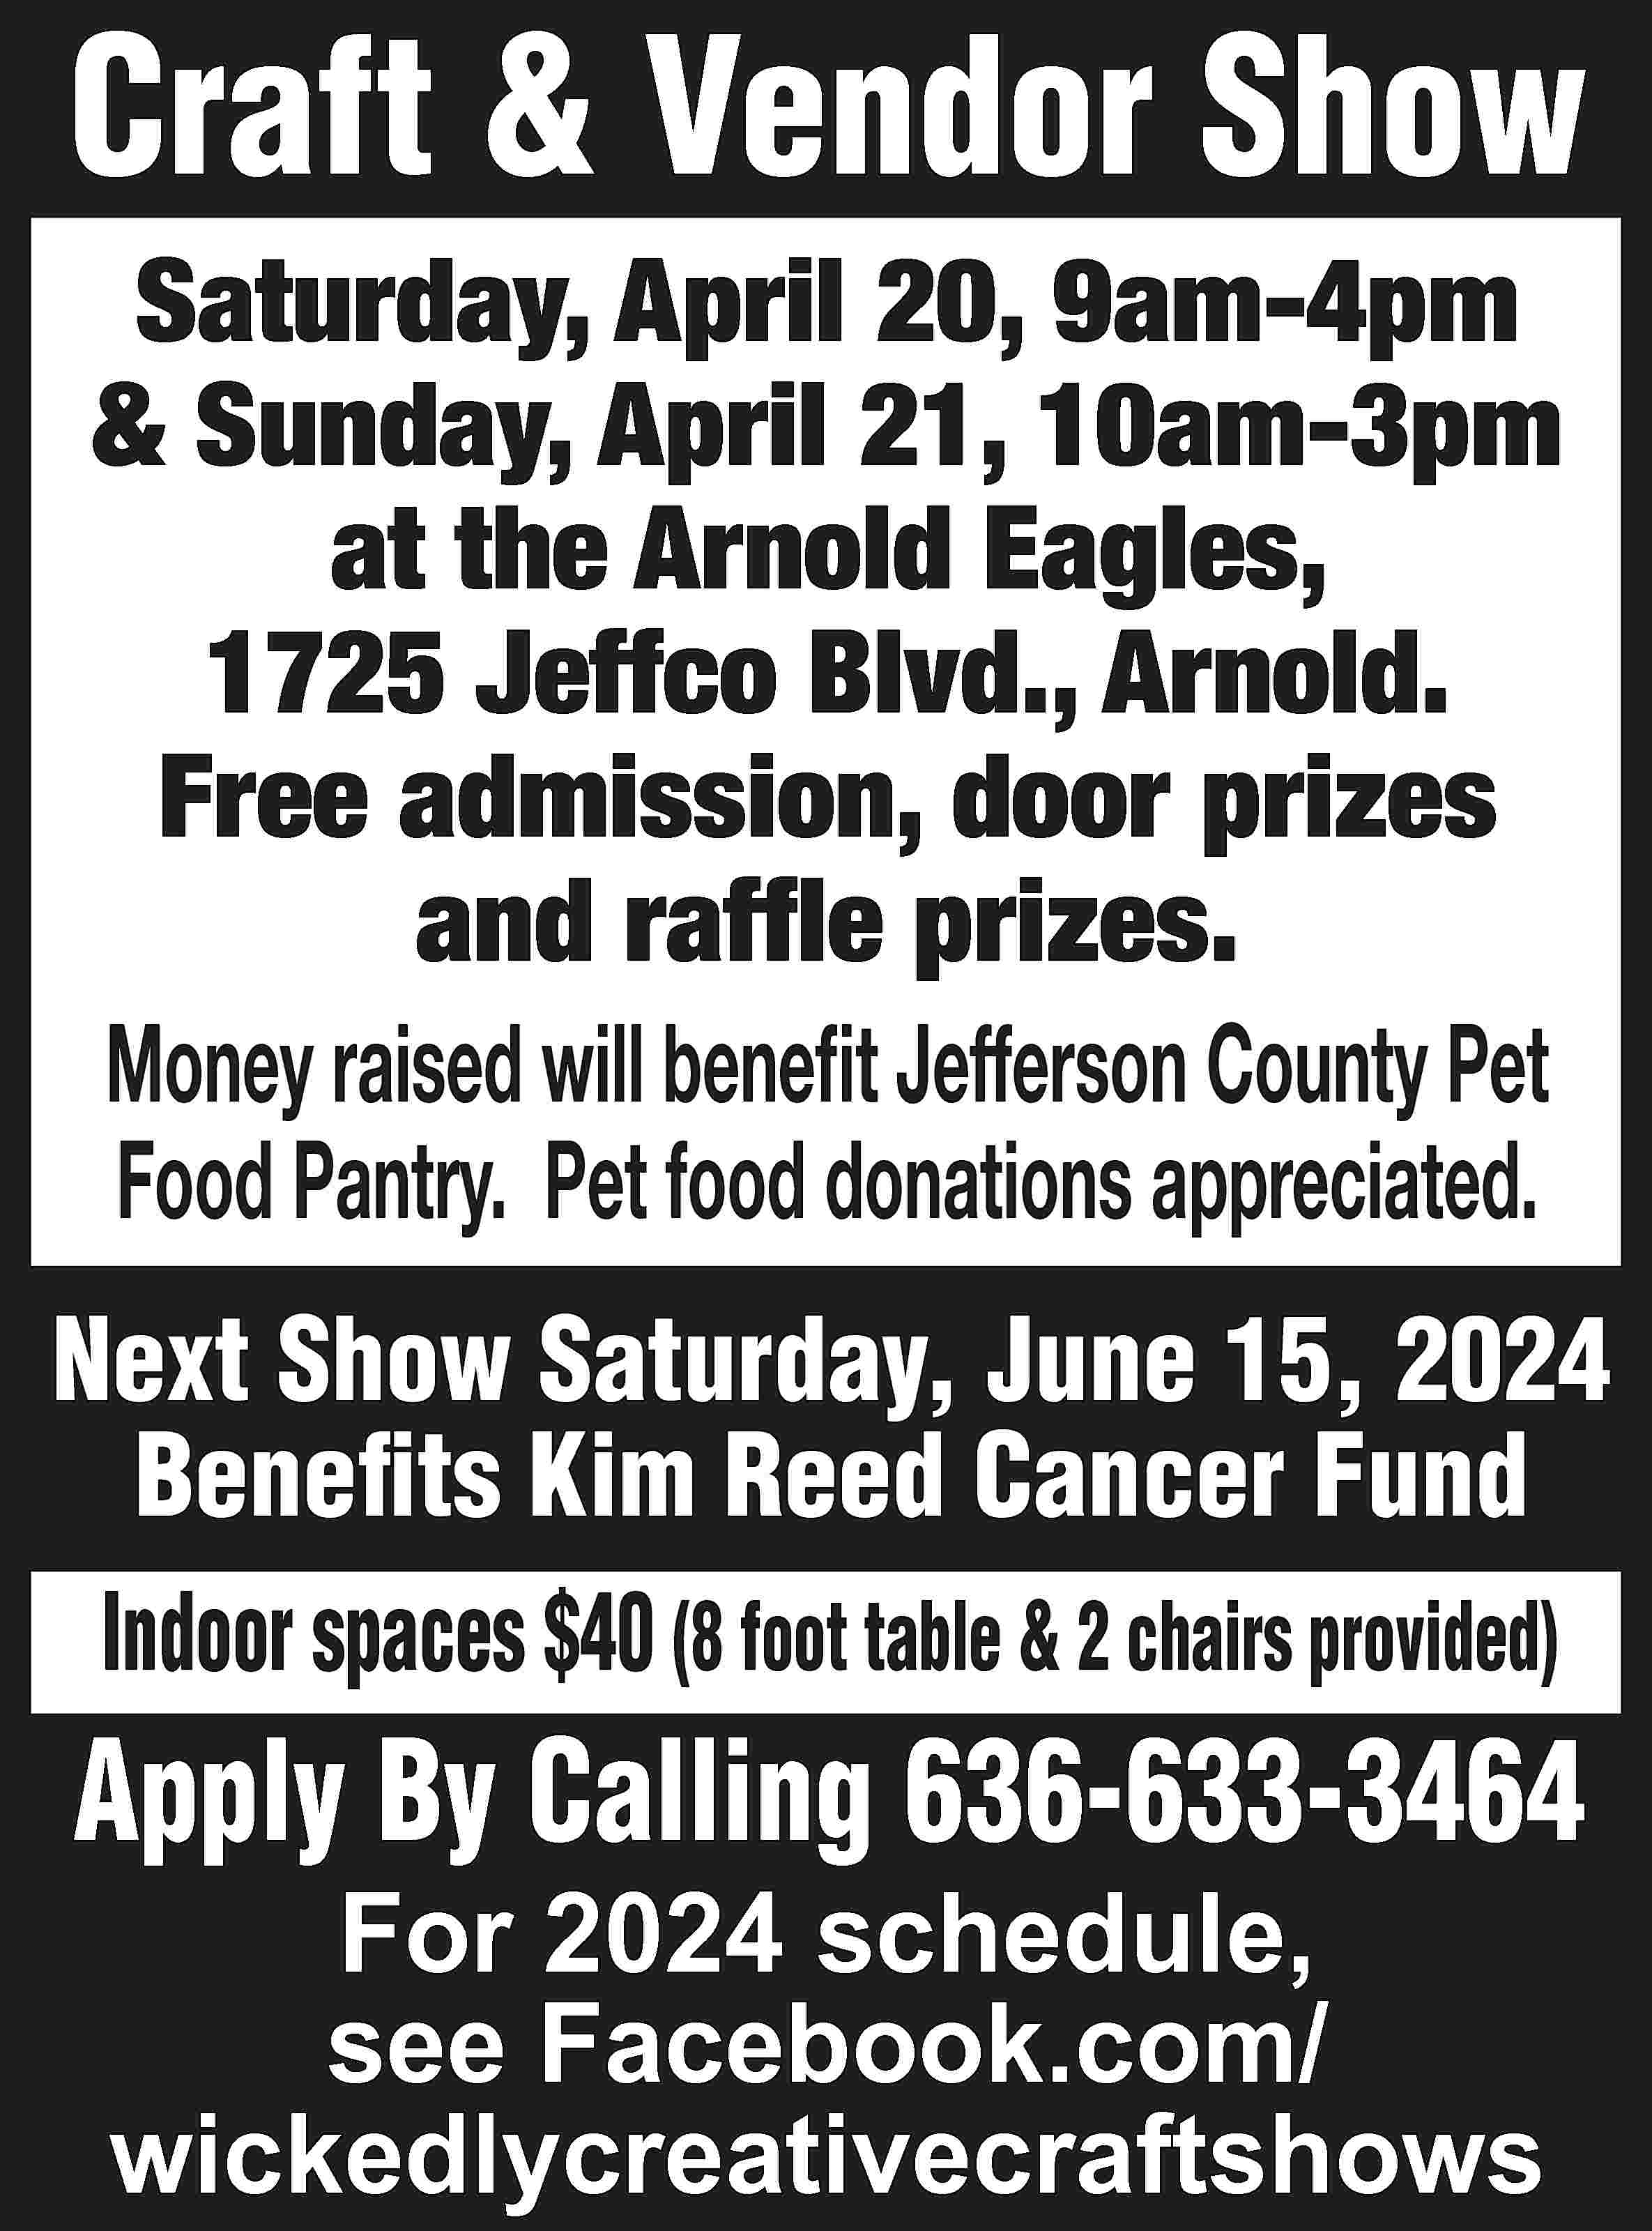 Craft & Vendor Show Saturday,  Craft & Vendor Show Saturday, April 20, 9am-4pm & Sunday, April 21, 10am-3pm at the Arnold Eagles, 1725 Jeffco Blvd., Arnold. Free admission, door prizes and raffle prizes. Money raised will benefit Jefferson County Pet Food Pantry. Pet food donations appreciated. Next Show Saturday, June 15, 2024 Benefits Kim Reed Cancer Fund Indoor spaces $40 (8 foot table & 2 chairs provided) Apply By Calling 636-633-3464 For 2024 schedule, see Facebook.com/ wickedlycreativecraftshows